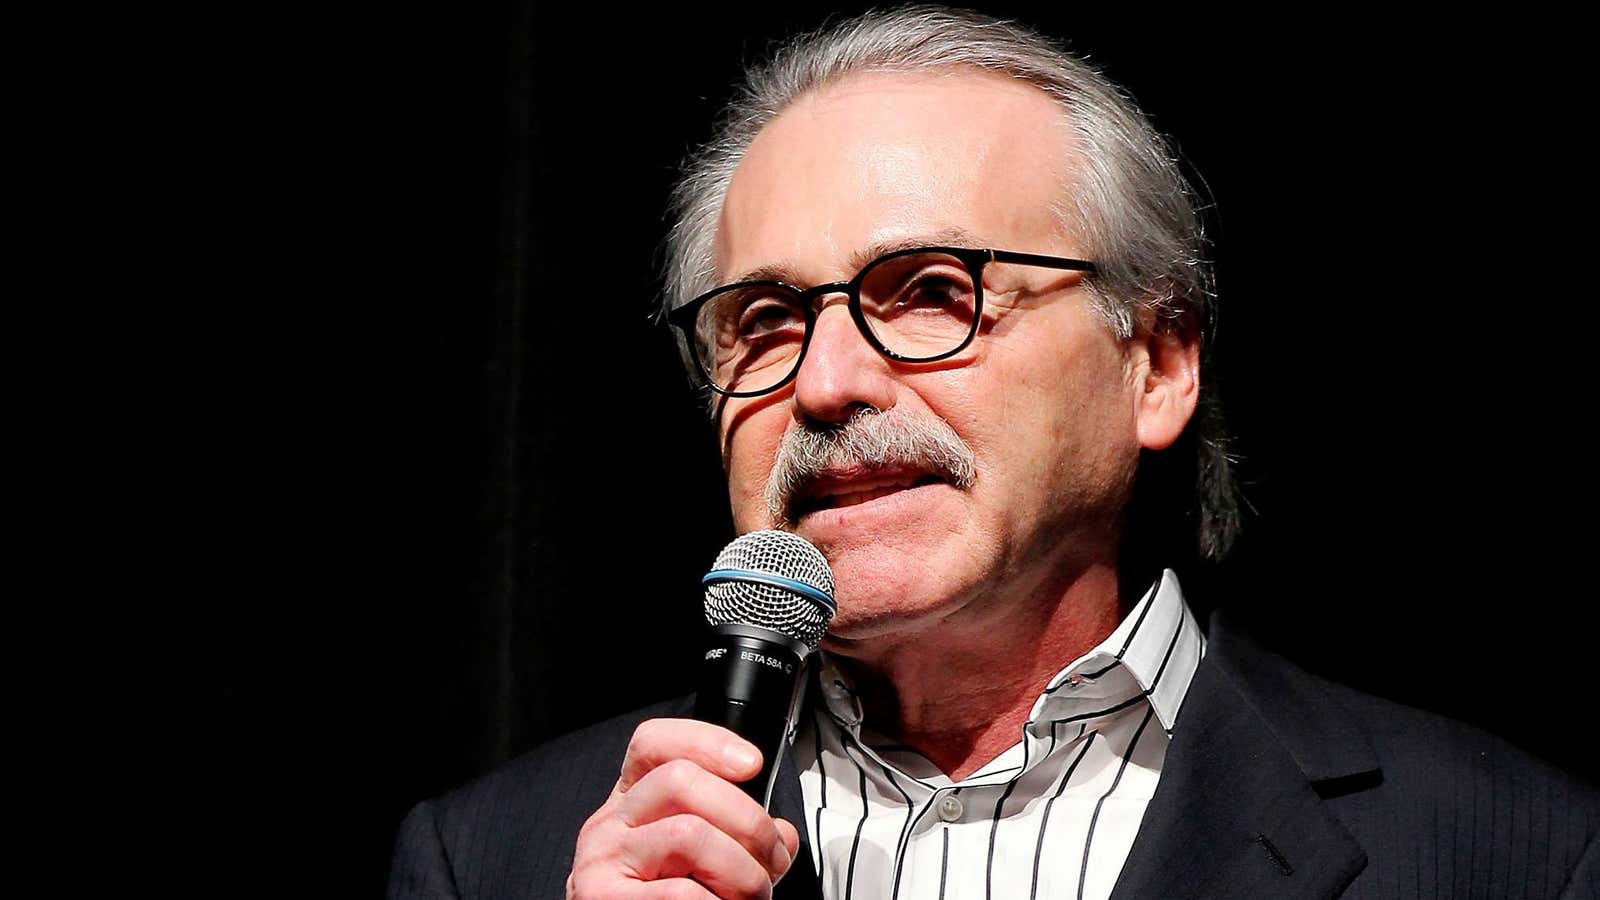 Pecker reportedly has a safe full of information on Trump.